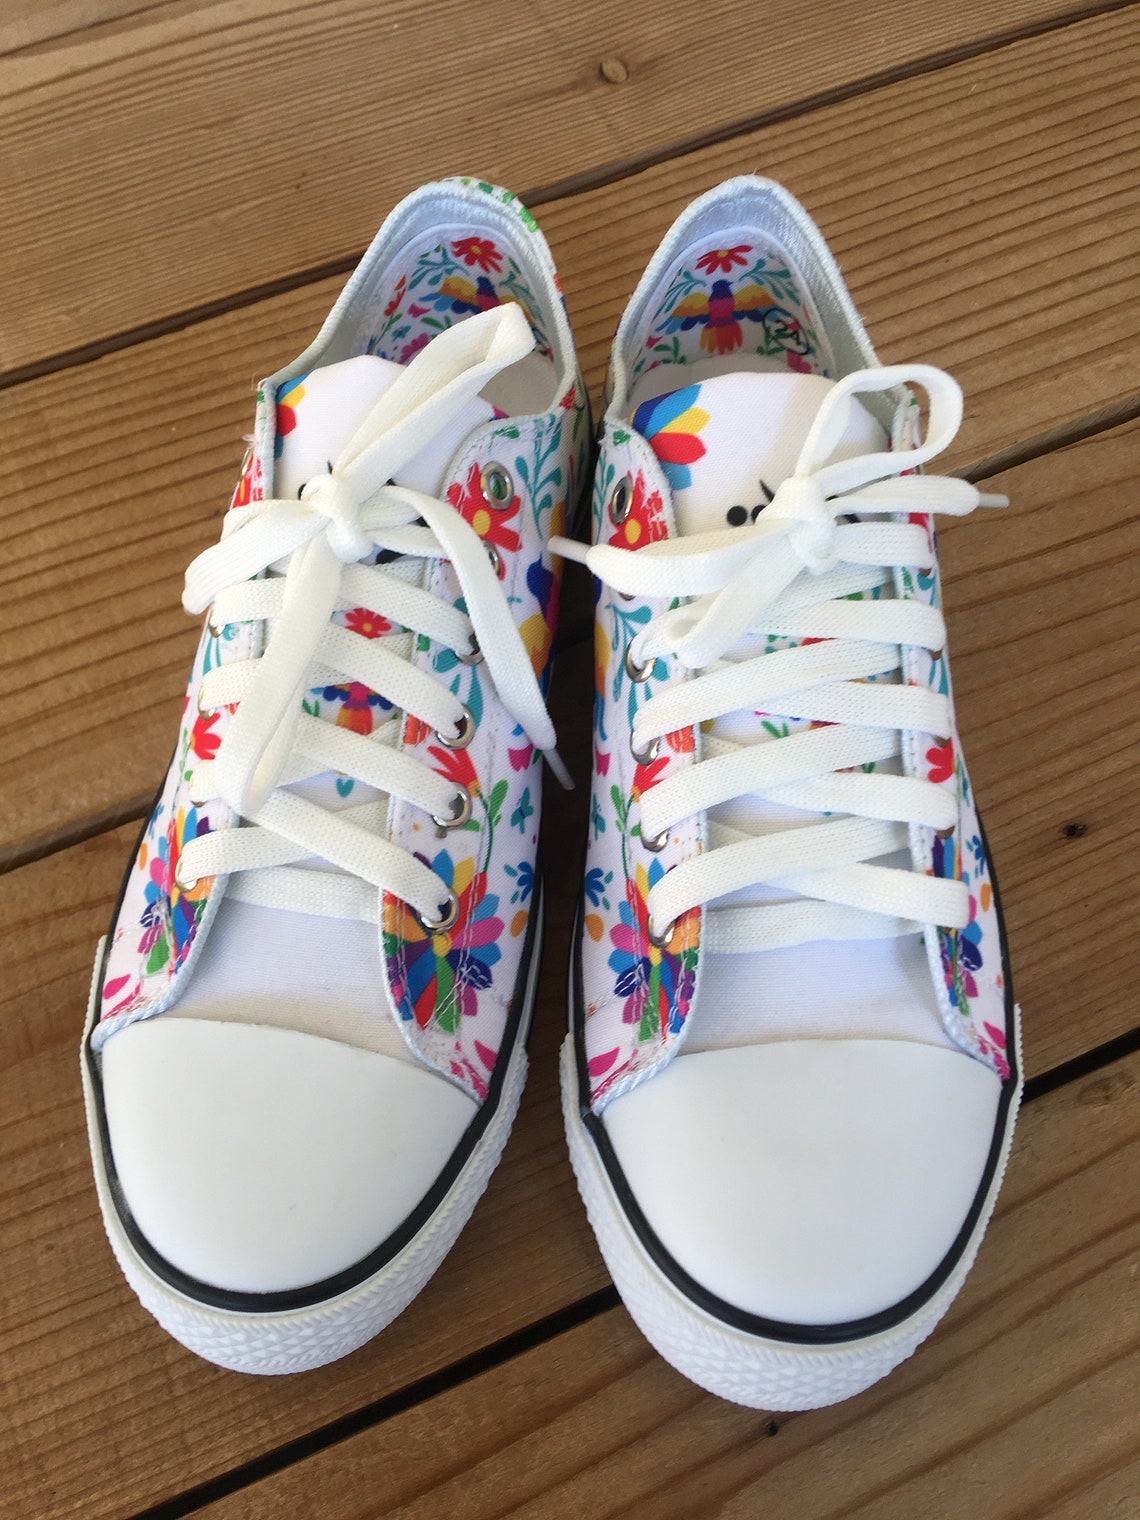 Women Sneakers Mexican style Sneakers Women Shoes Printed | Etsy